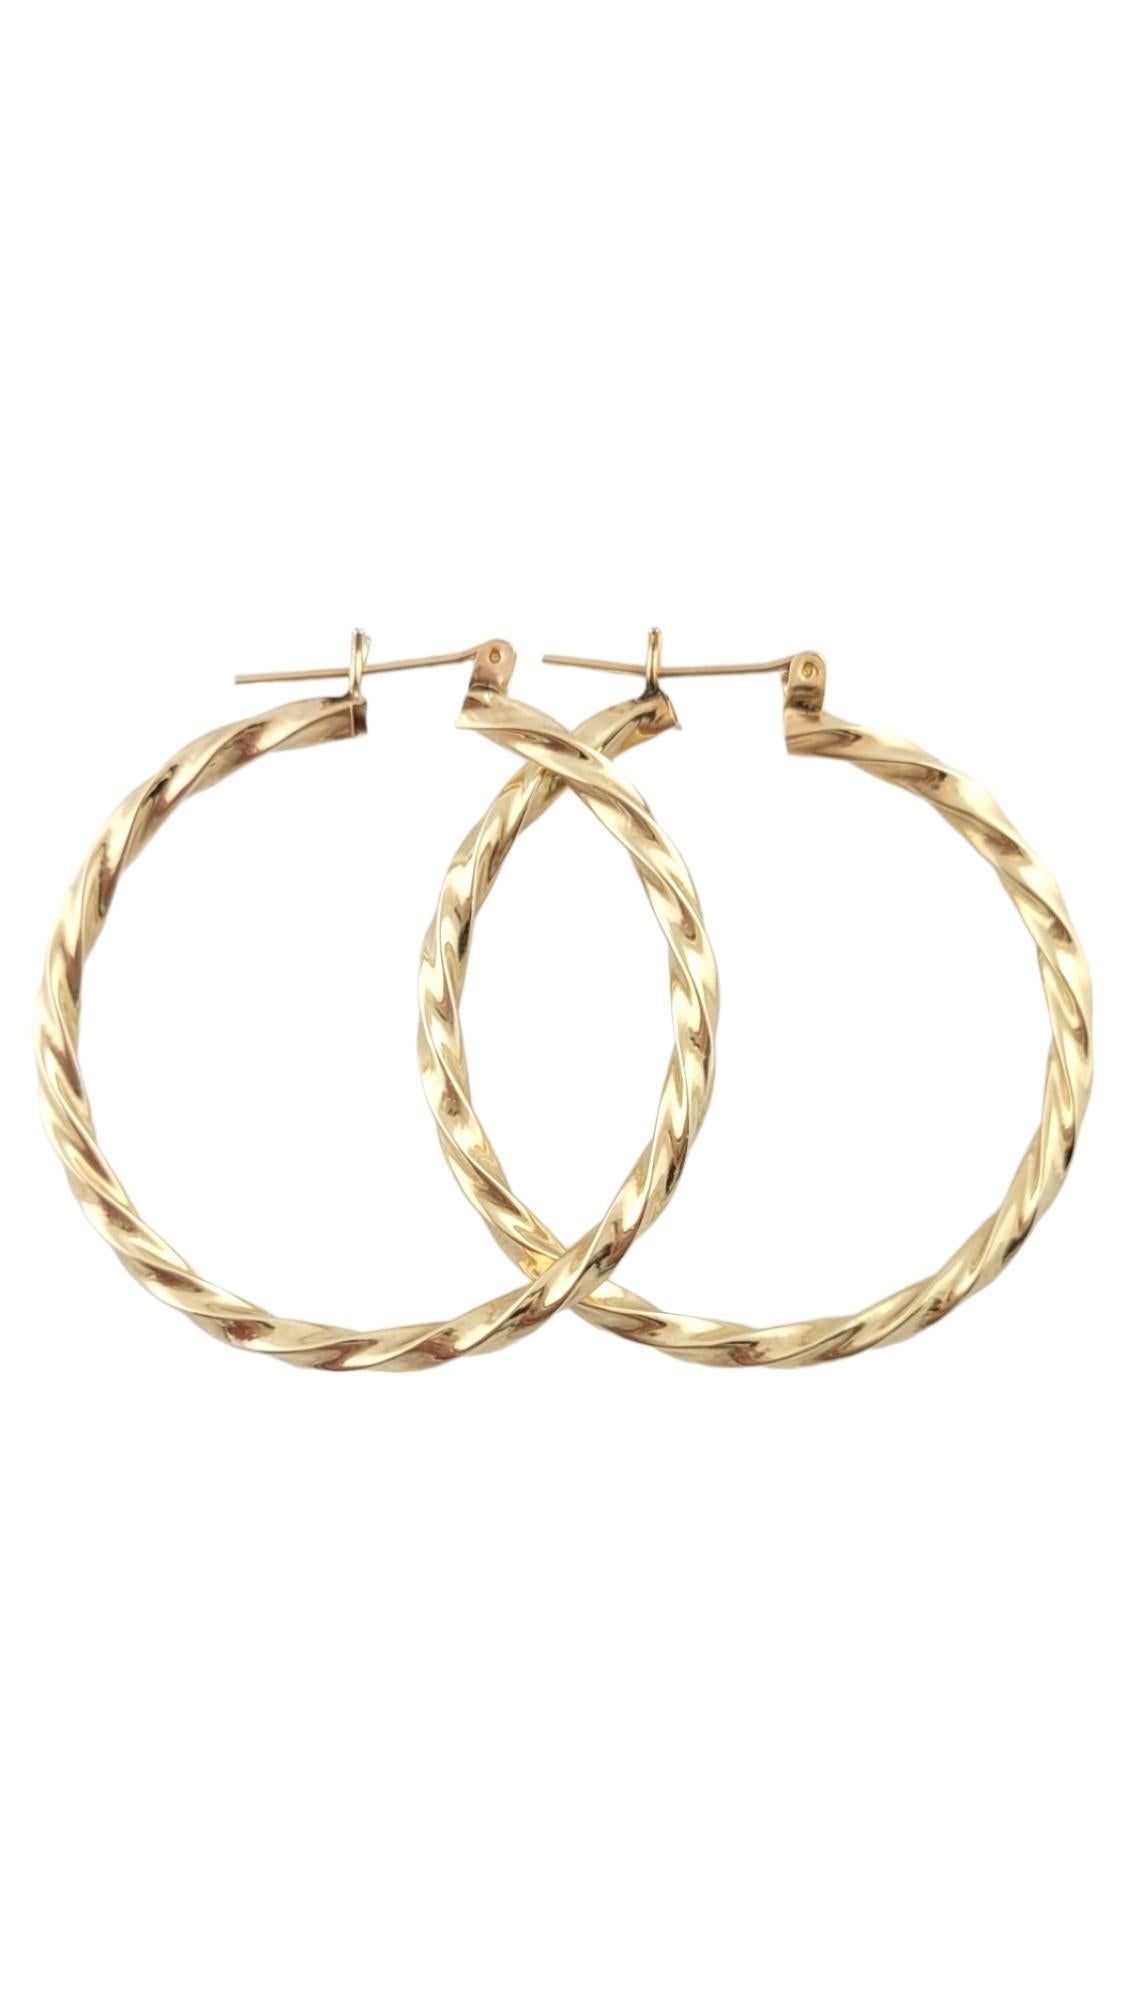 Vintage 14K Yellow Gold Twisted Hoop Earrings

This gorgeous set of twisted hoops are crafted from 14K yellow gold for a beautiful finish!

Diameter 38.25mm
Width: 2.4mm

Weight: 3.0 dwt/ 4.6 g

Hallmark: 14K OJ

Very good condition, professionally